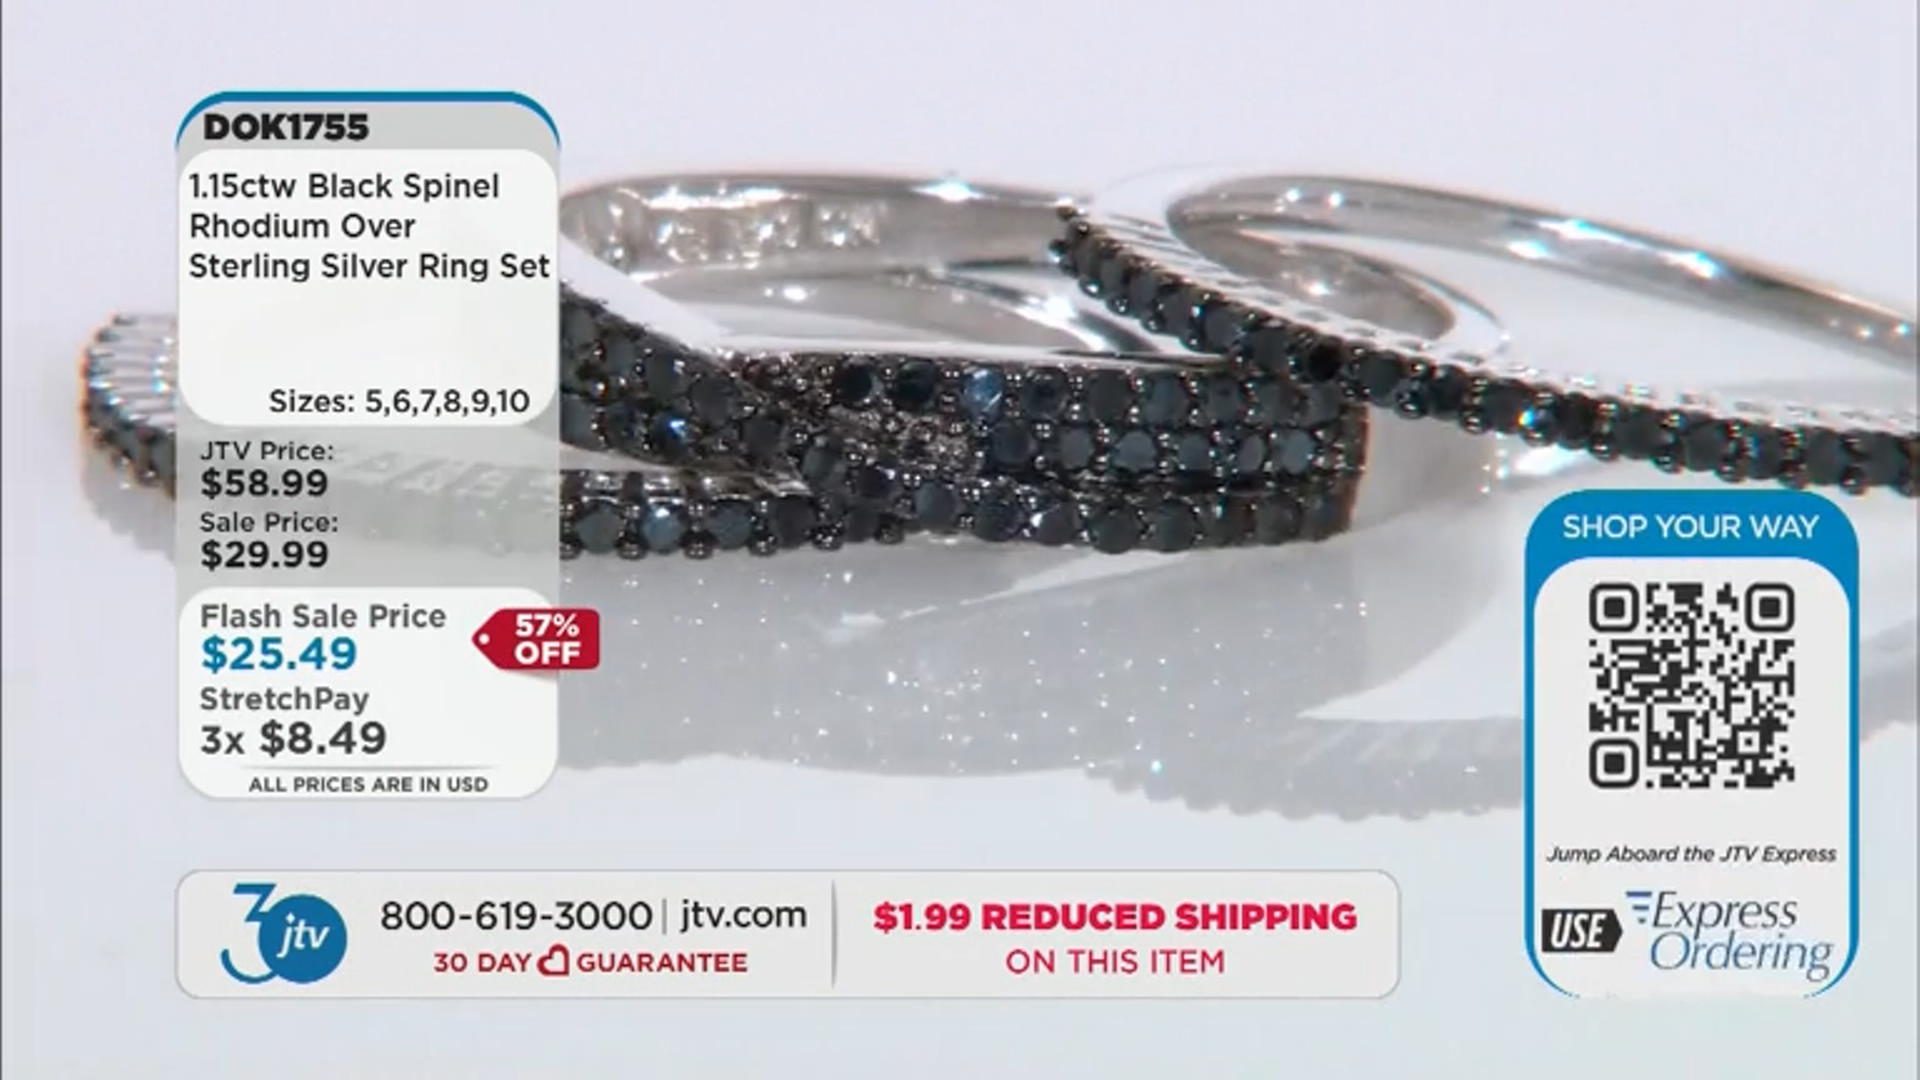 Black Spinel Rhodium Over Sterling Silver Ring Set 1.15ctw Video Thumbnail